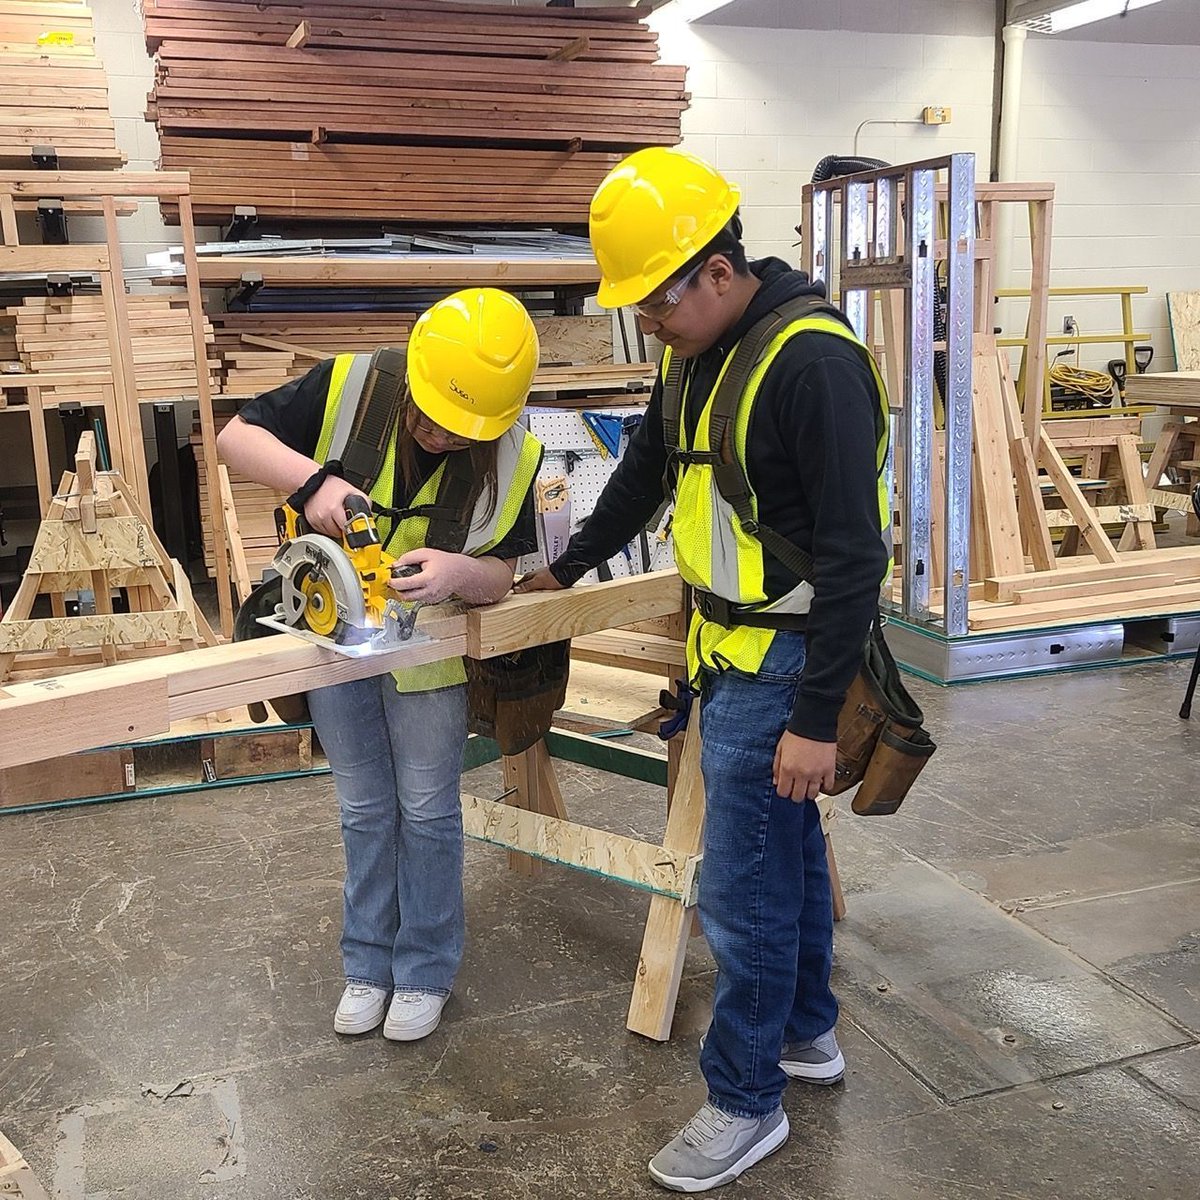 ICYMI - Schools, city and builders say Aurora construction career program nails it

The six-year program will give students the training and skills necessary for top jobs in the trade — with a college degree

buff.ly/3W52MYy 

#EDcolo #AuroraCO